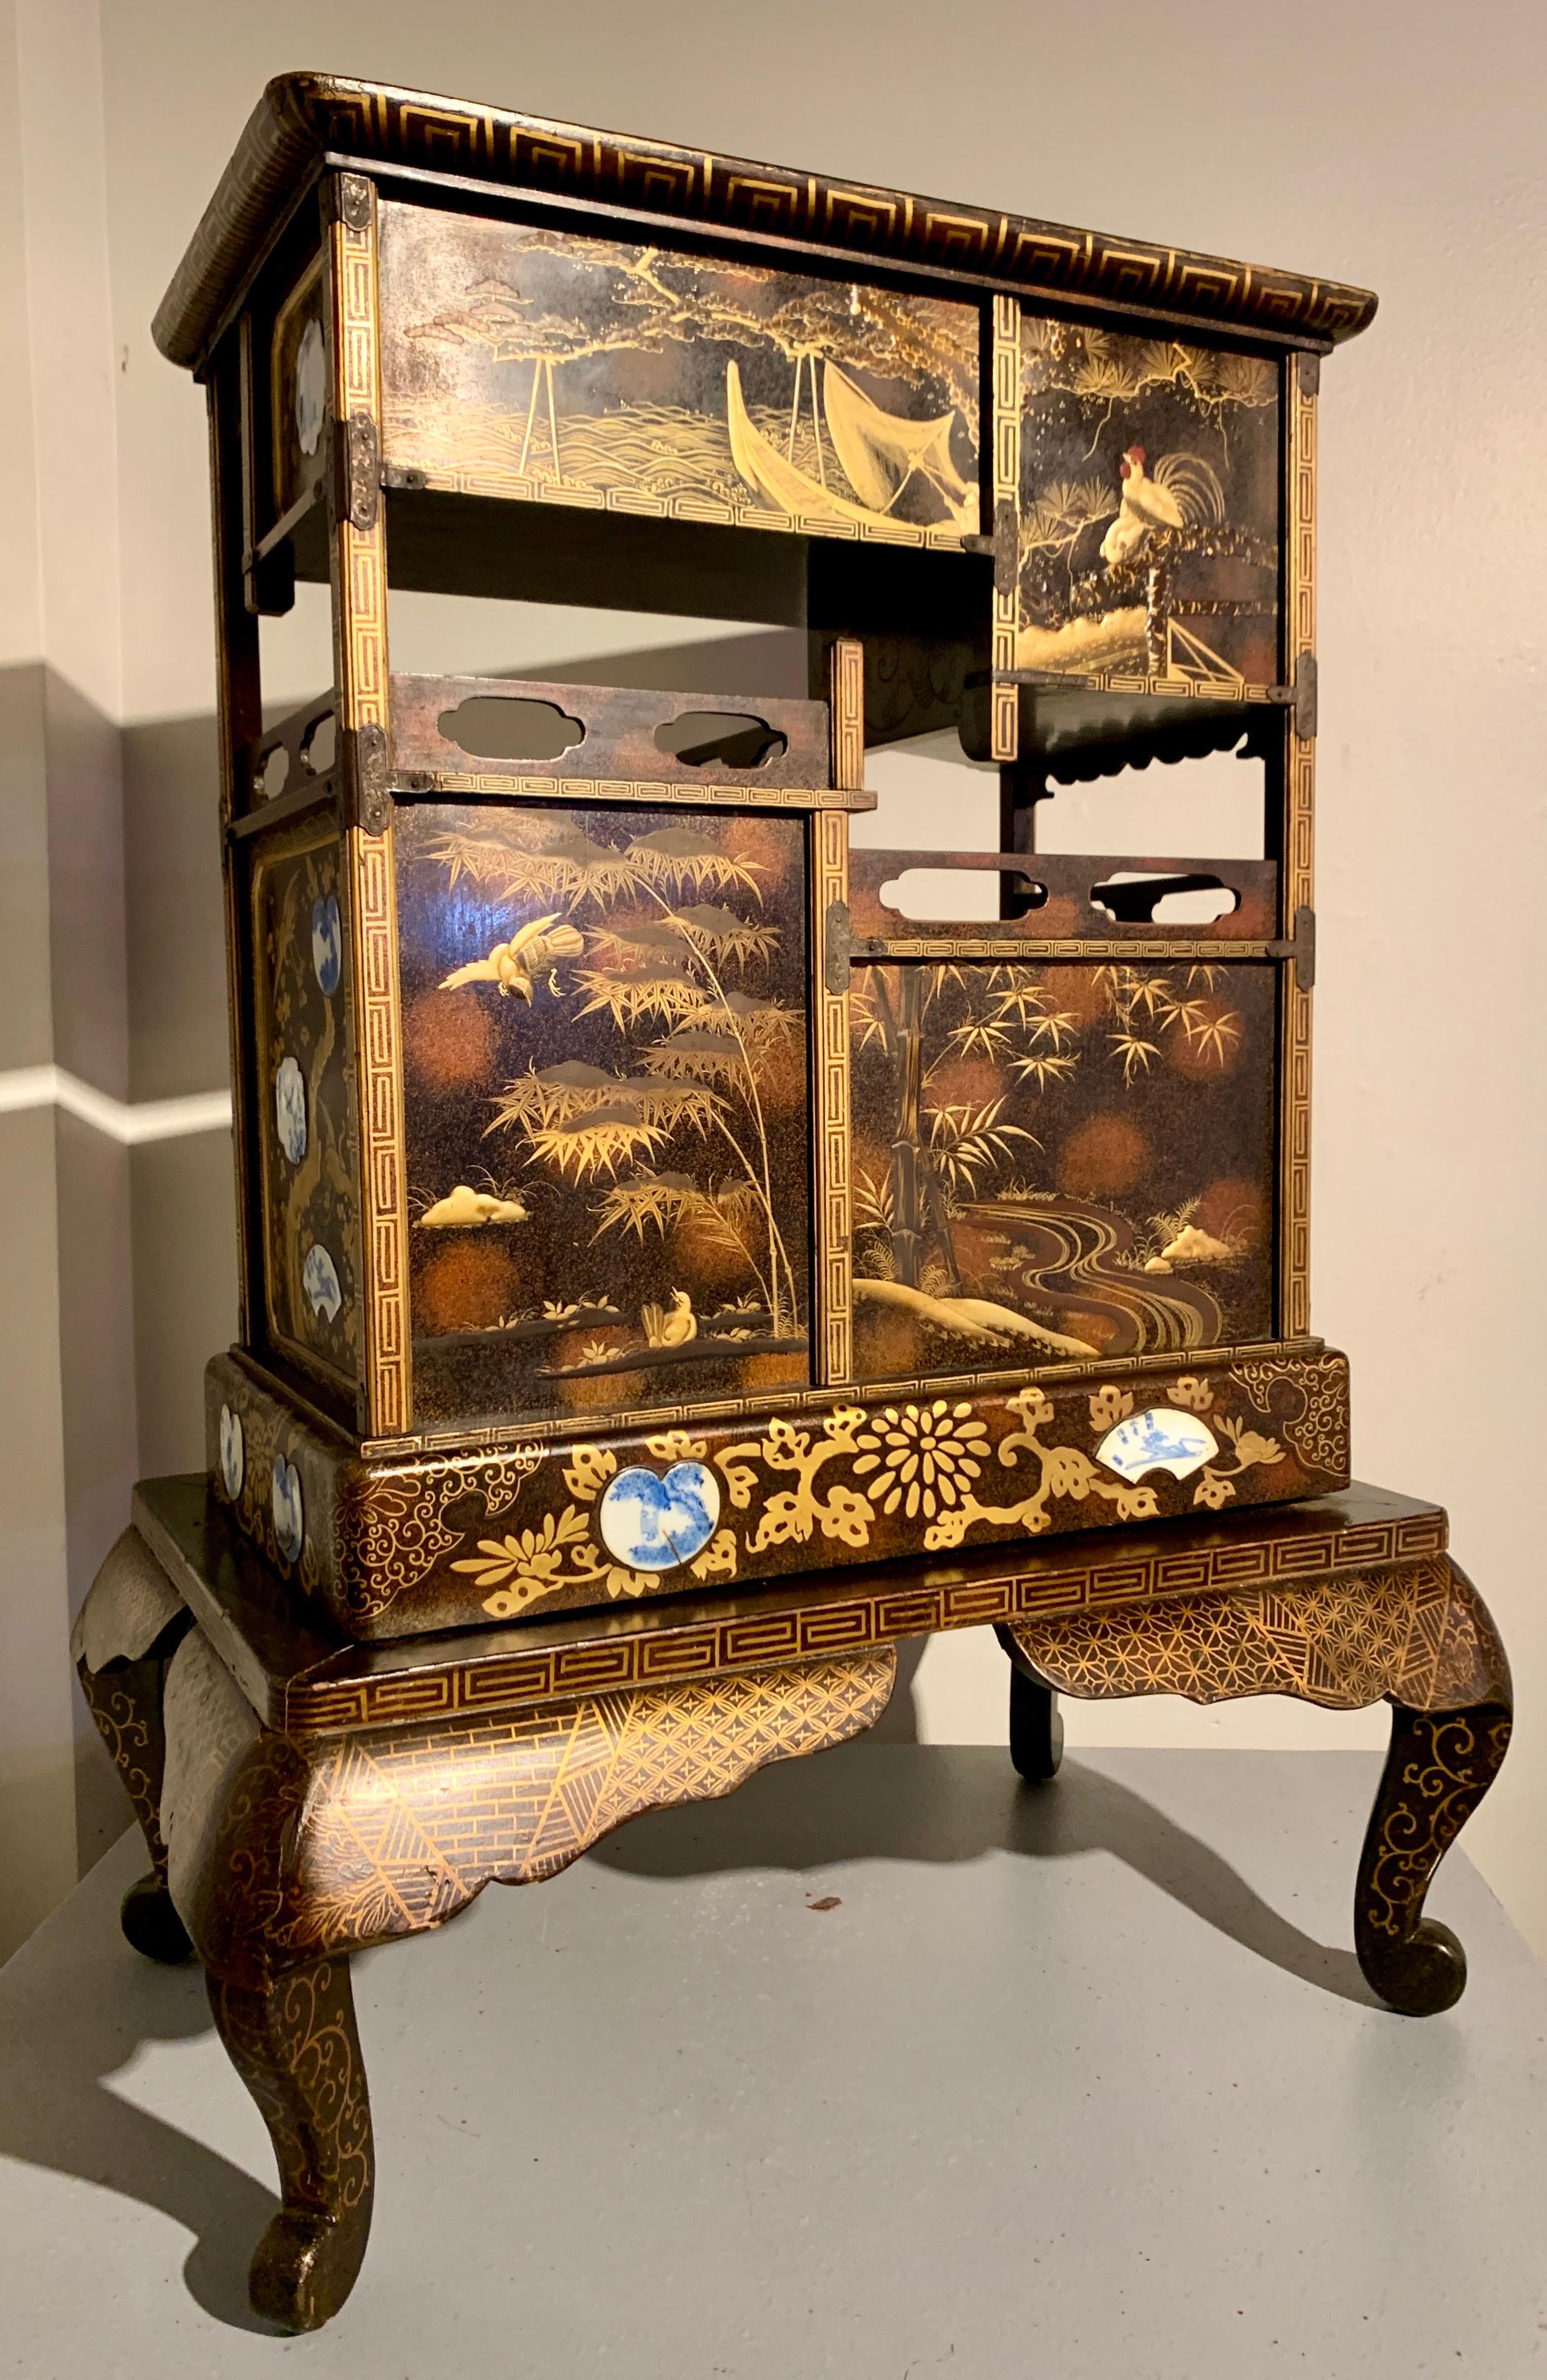 Porcelain Japanese Lacquer Display Cabinet on Stand, Meiji Period, 19th Century, Japan For Sale